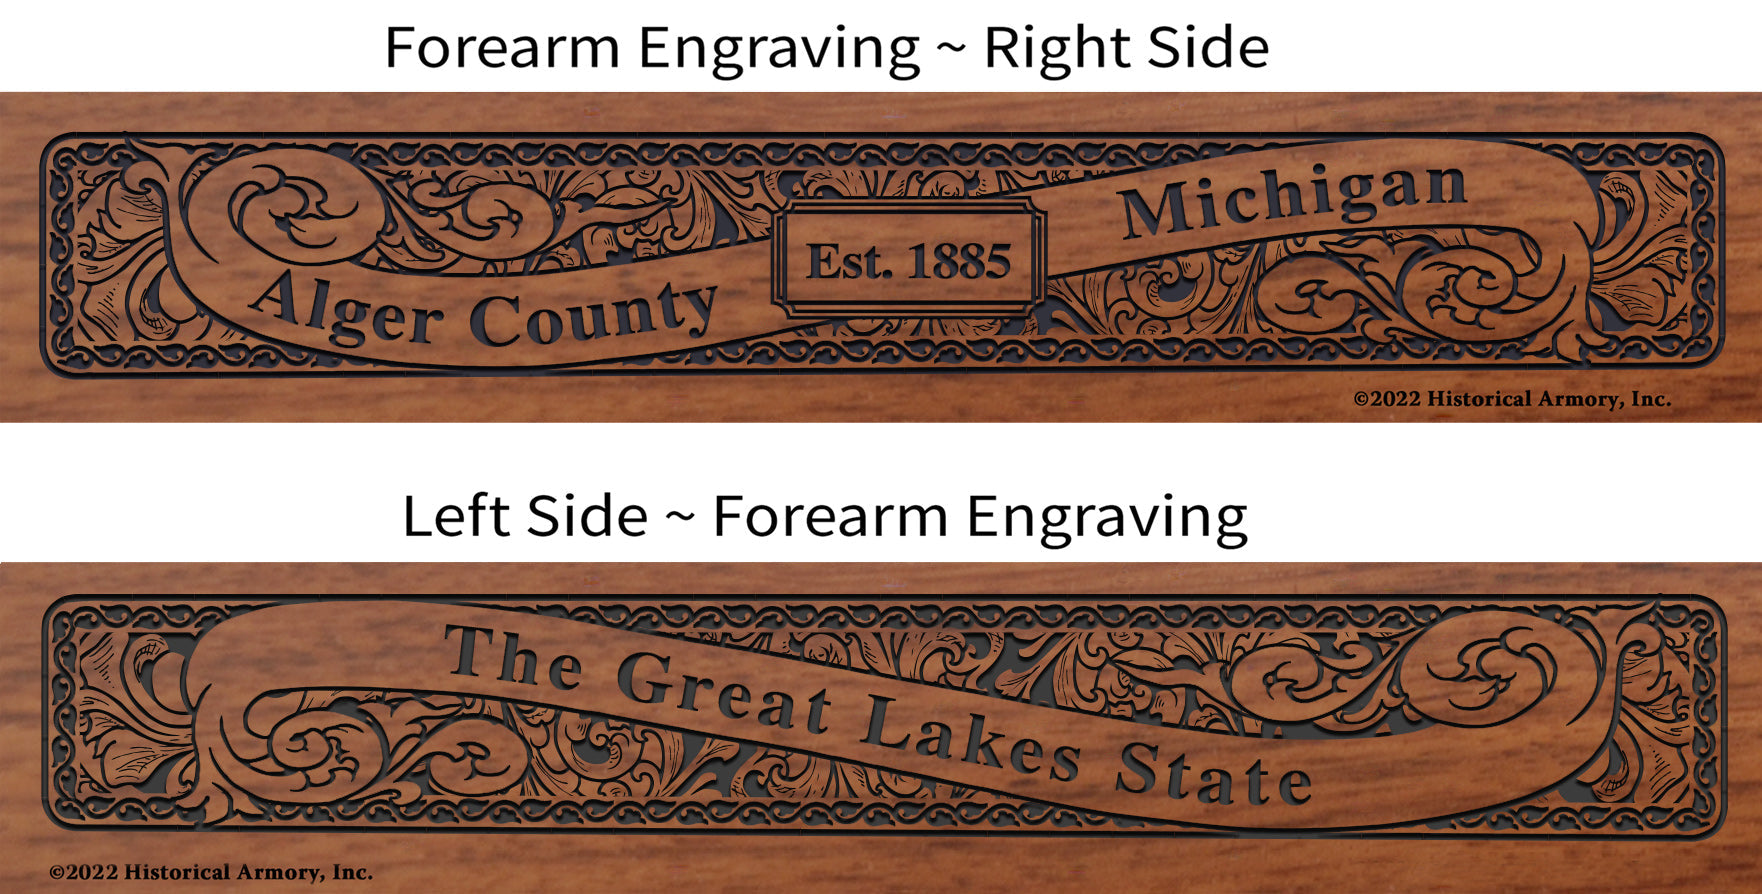 Alger County Michigan Engraved Rifle Forearm